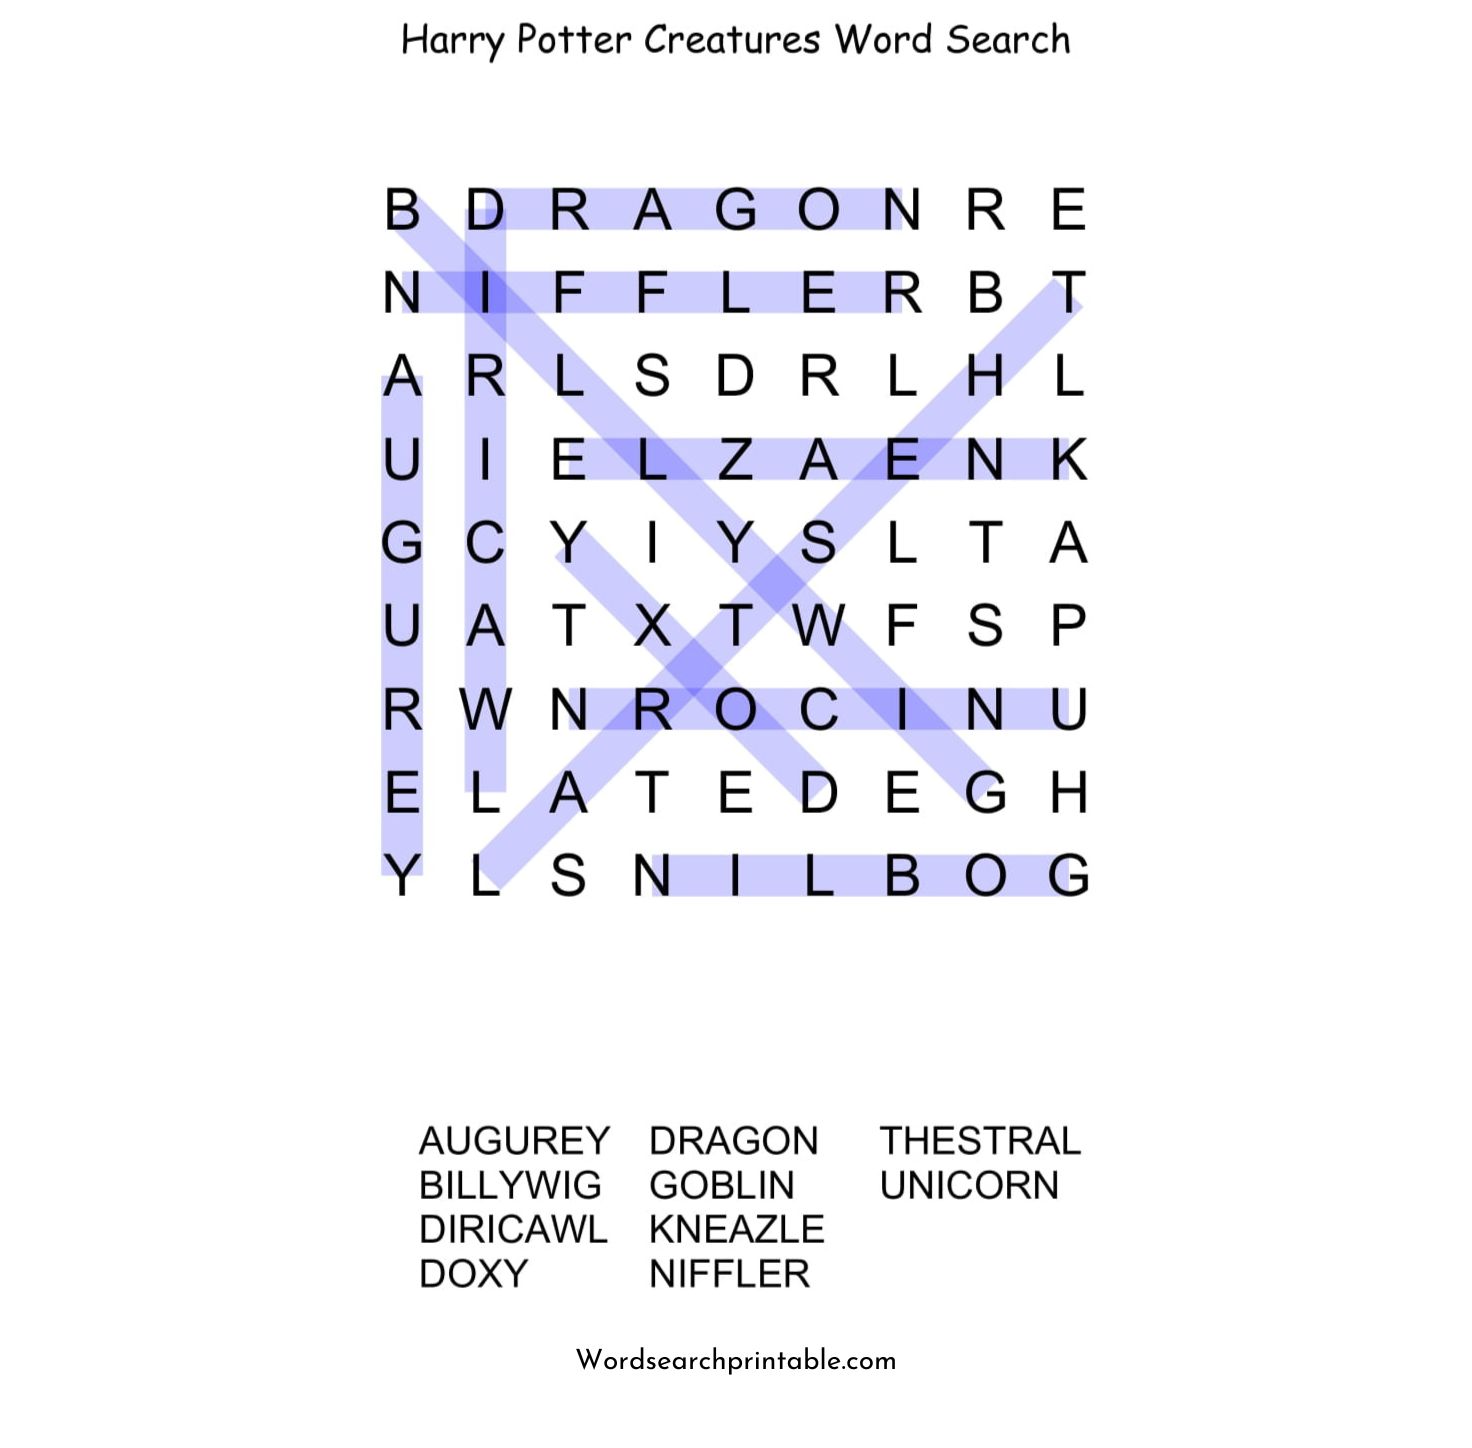 harry potter creatures word search puzzle solution